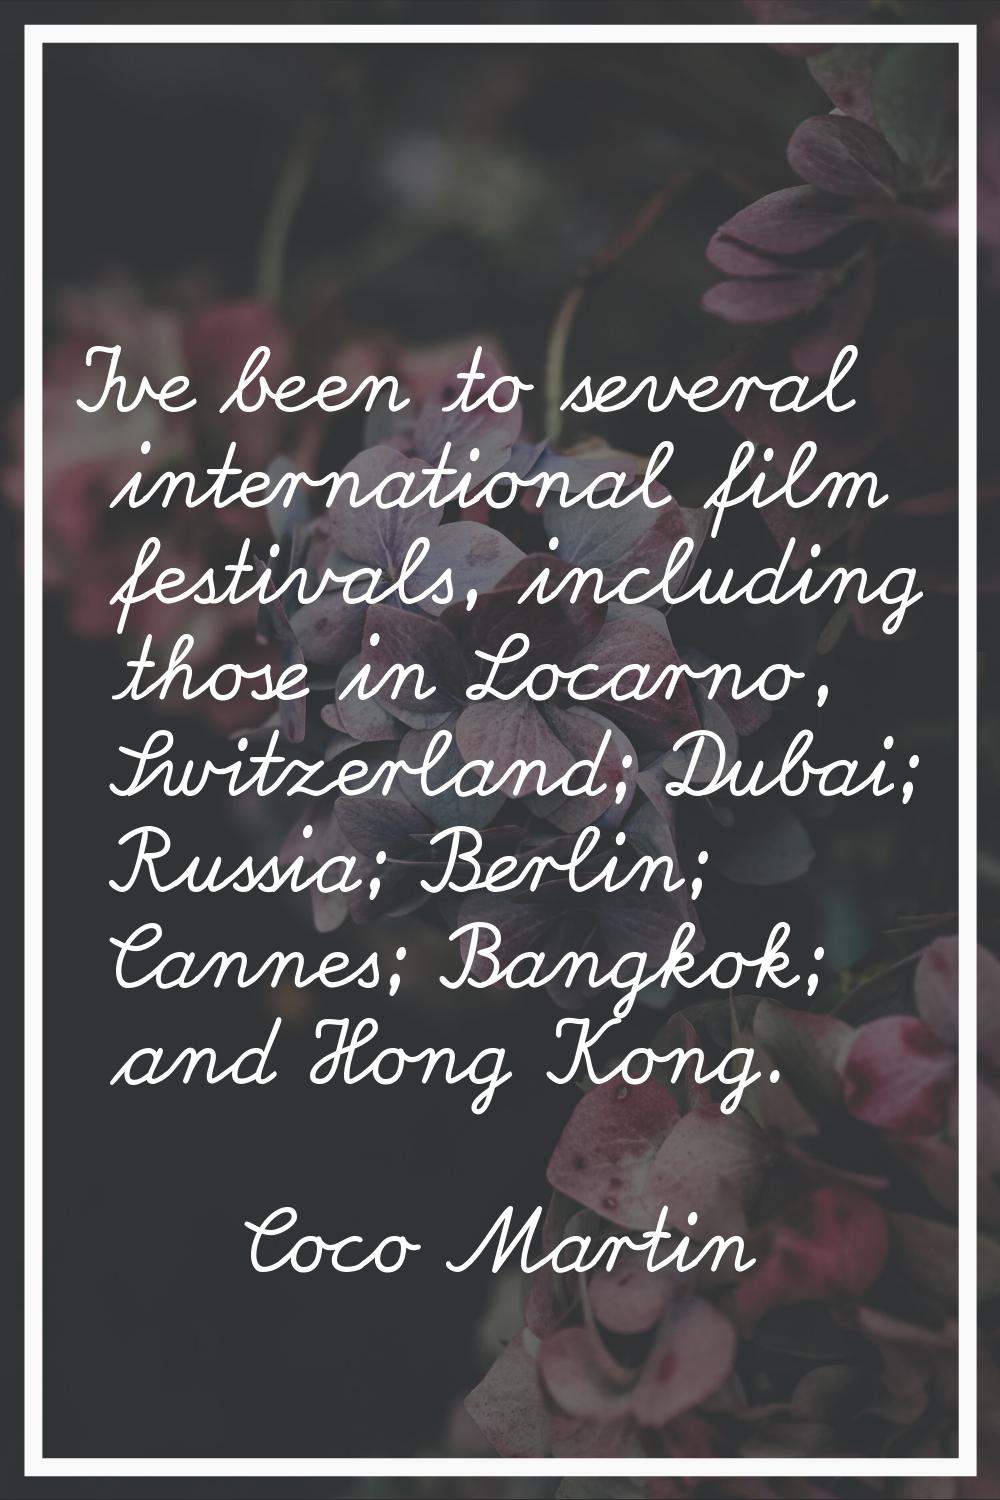 I've been to several international film festivals, including those in Locarno, Switzerland; Dubai; 